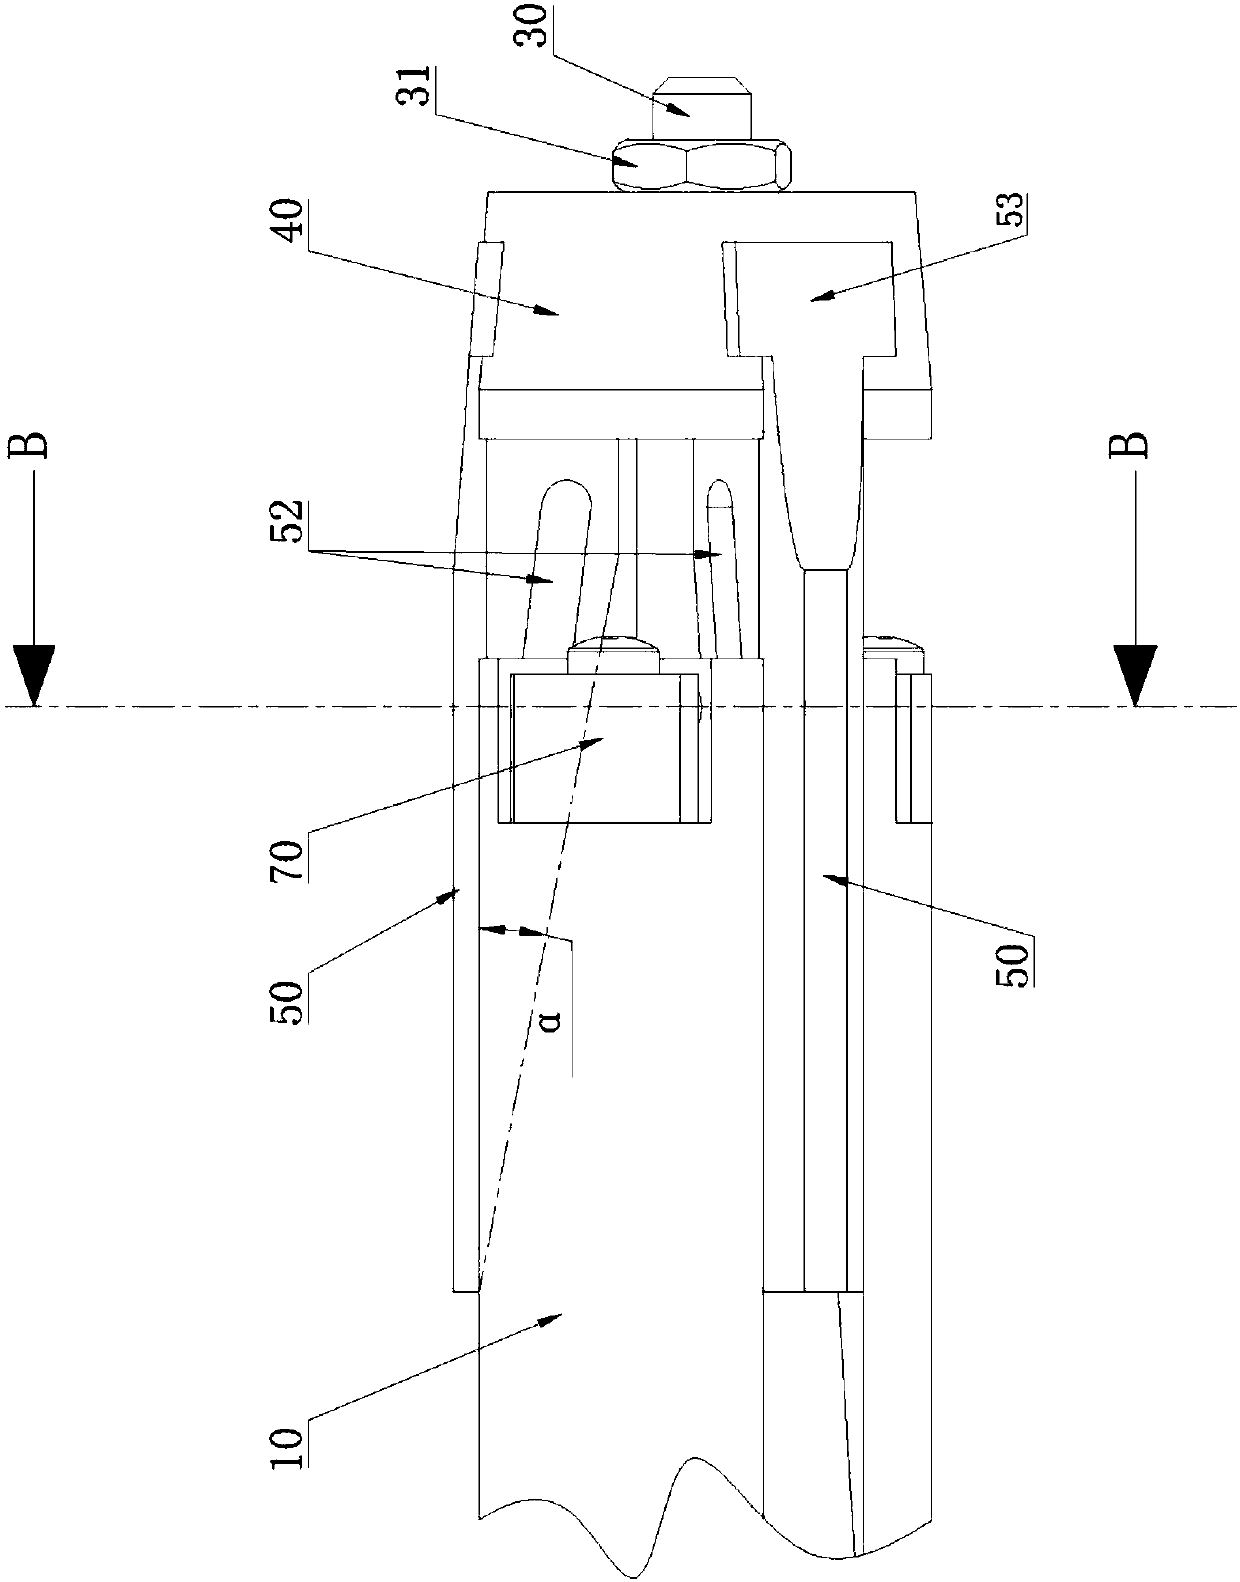 Inner hole clamping device